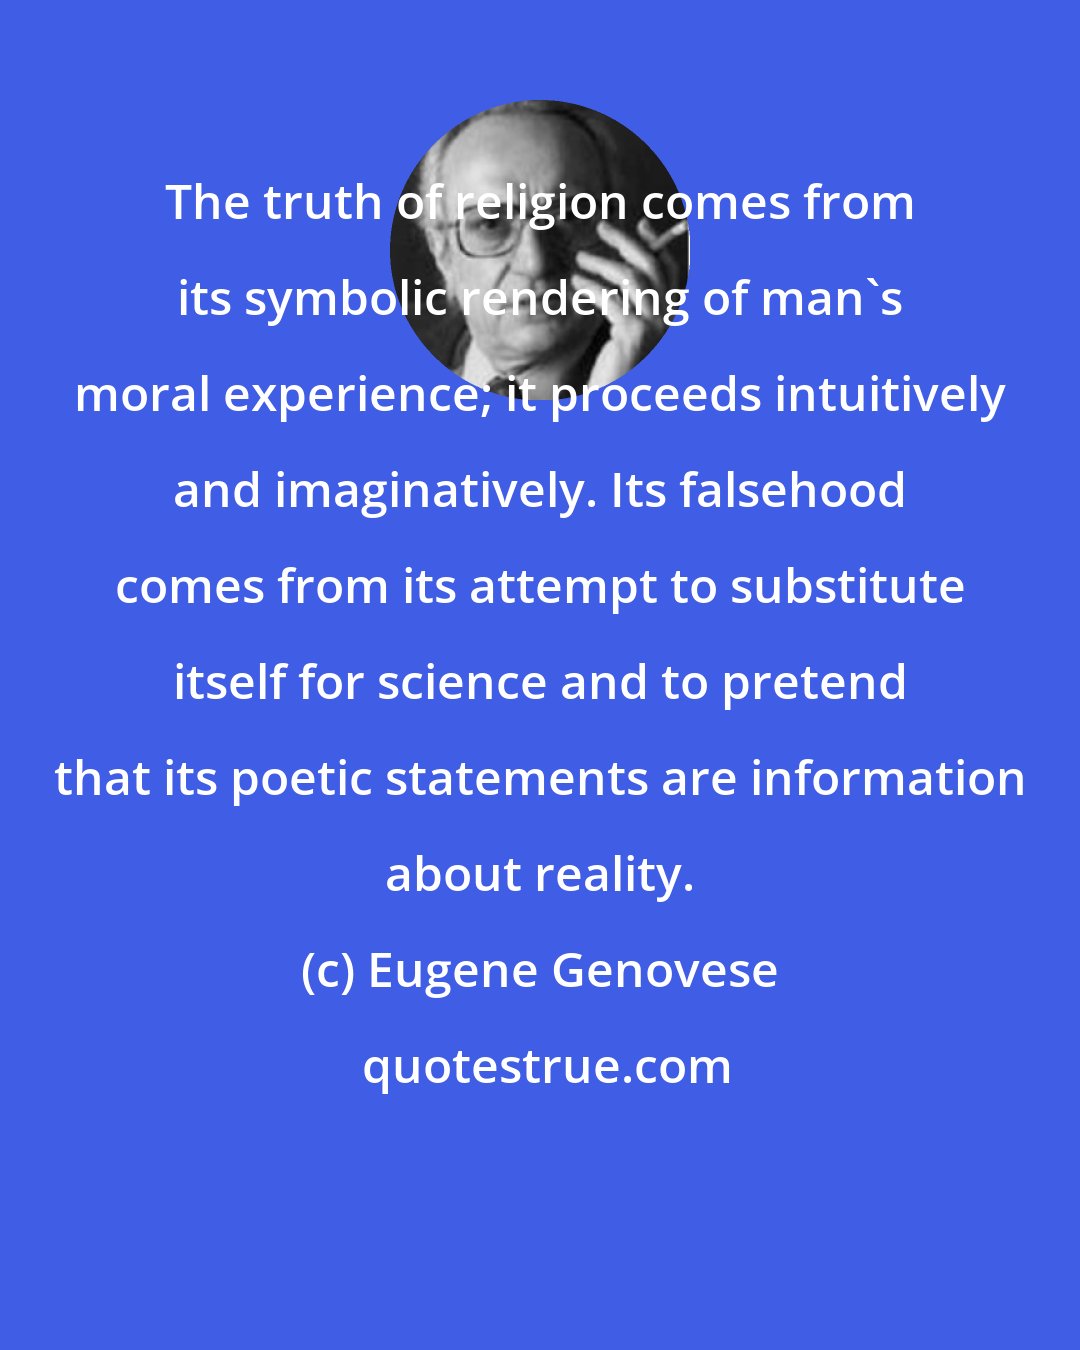 Eugene Genovese: The truth of religion comes from its symbolic rendering of man's moral experience; it proceeds intuitively and imaginatively. Its falsehood comes from its attempt to substitute itself for science and to pretend that its poetic statements are information about reality.